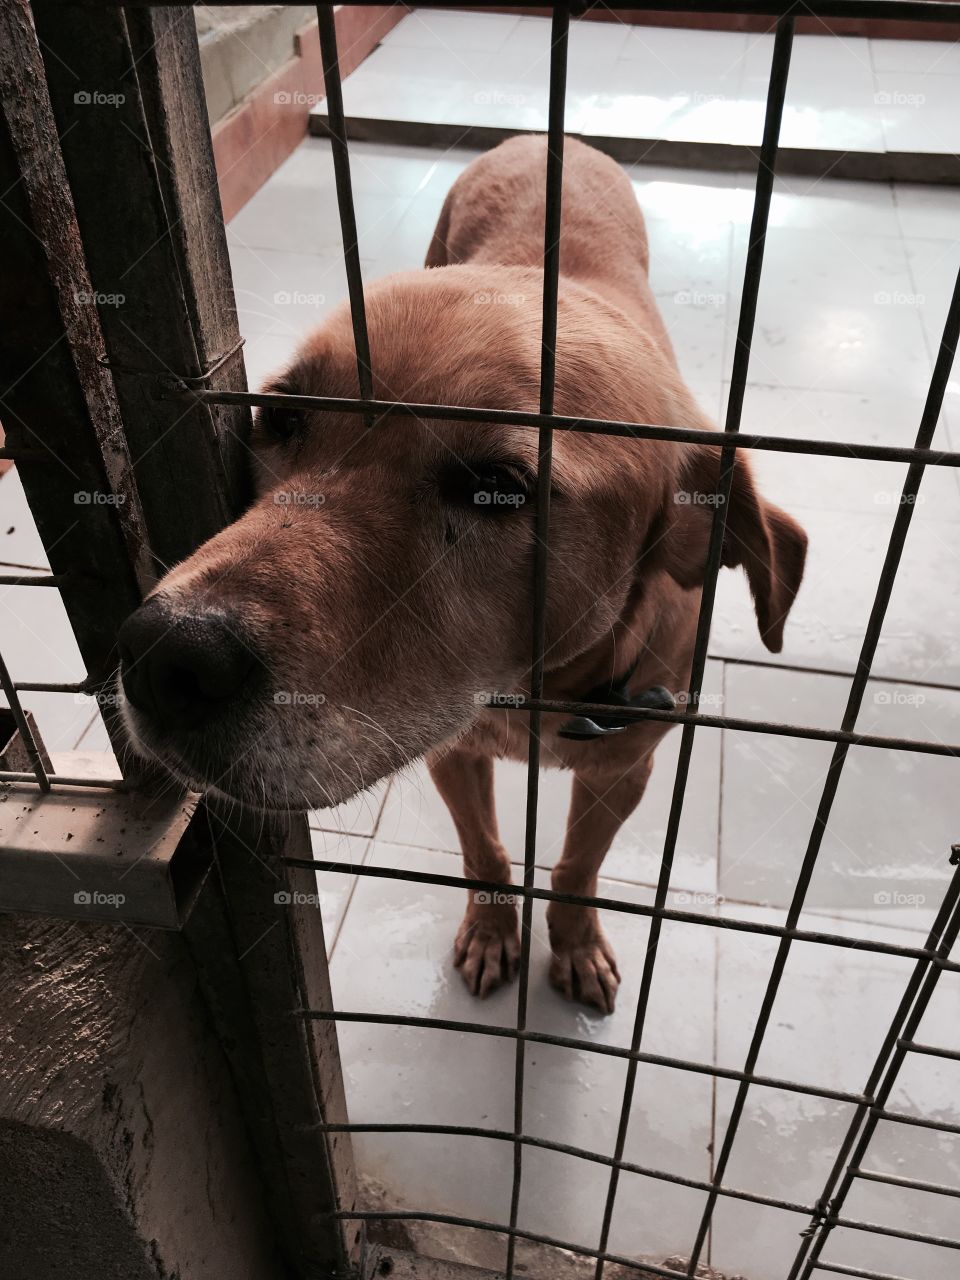 A sad yet cute and funny picture of dog up for adoption in his kennel, with his nose sticking out of the opening, looking at something 